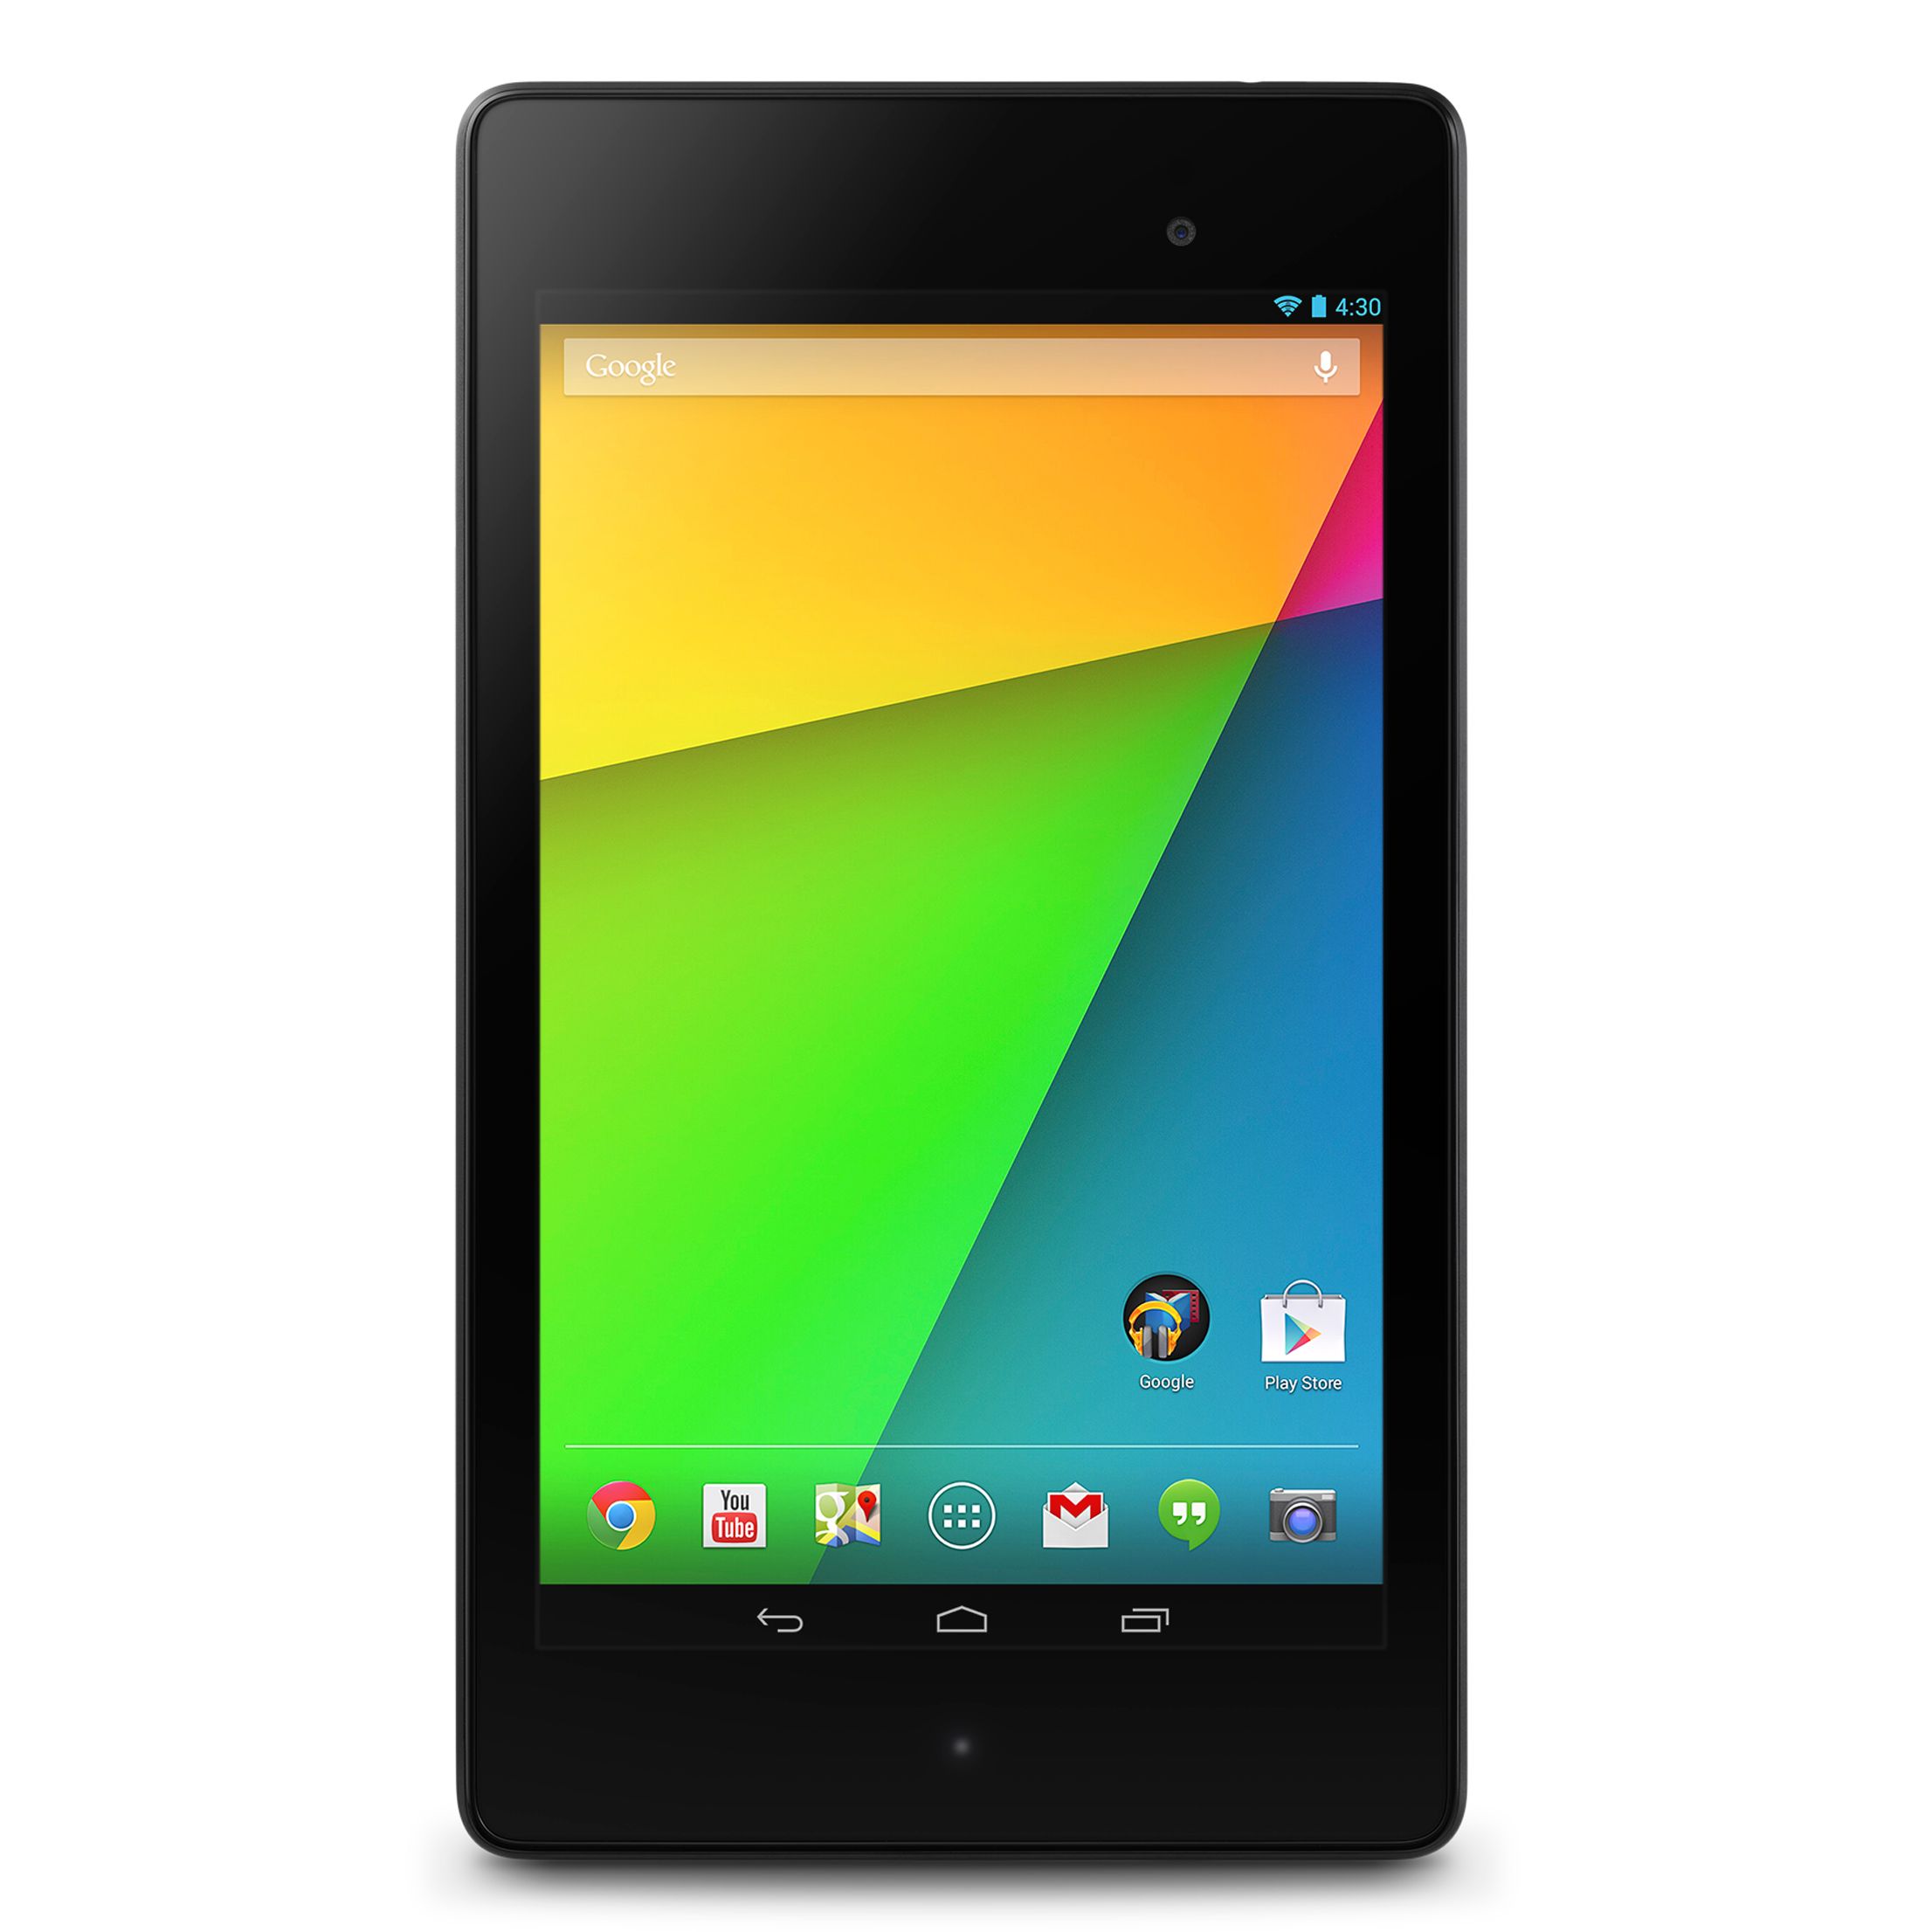 Google Nexus 7 (2013) Tablet, Qualcomm Snapdragon S4, Android, 7", NFC, Wi-Fi, 32GB